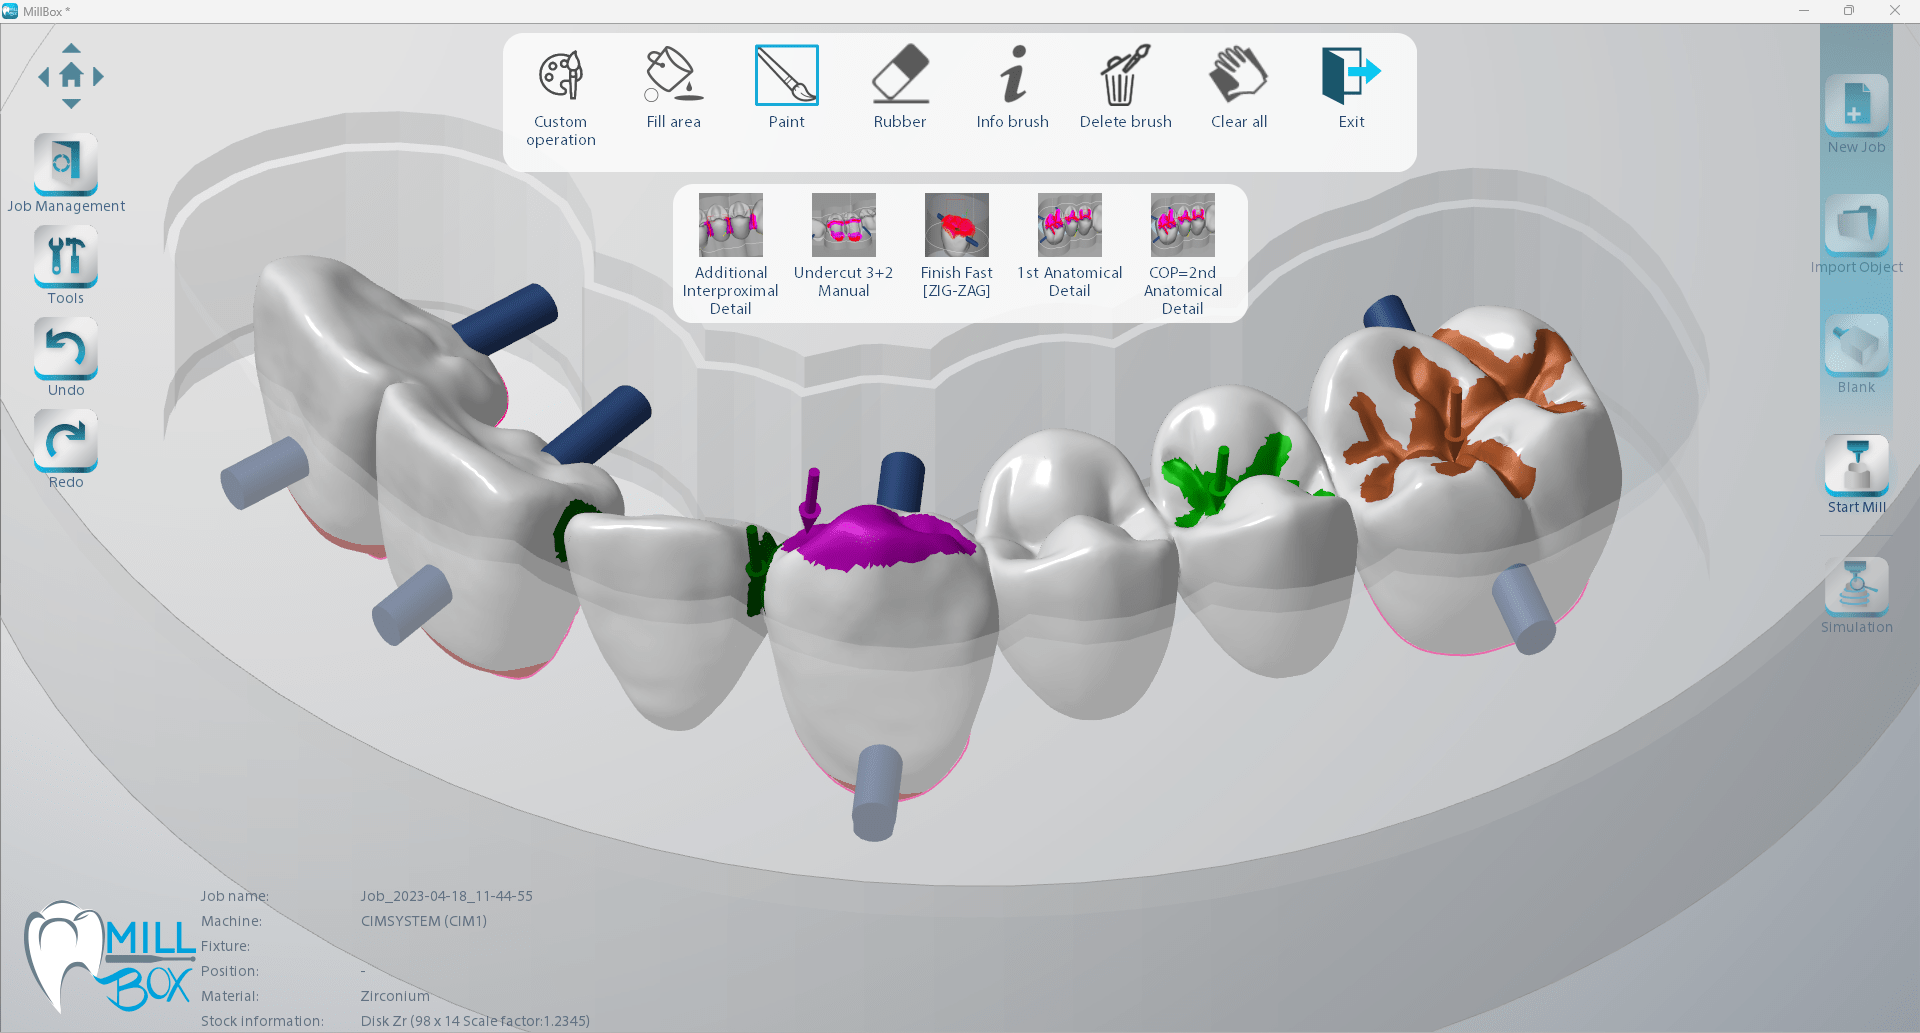 Image shows a print screen of selecting work area module in millbox dental software